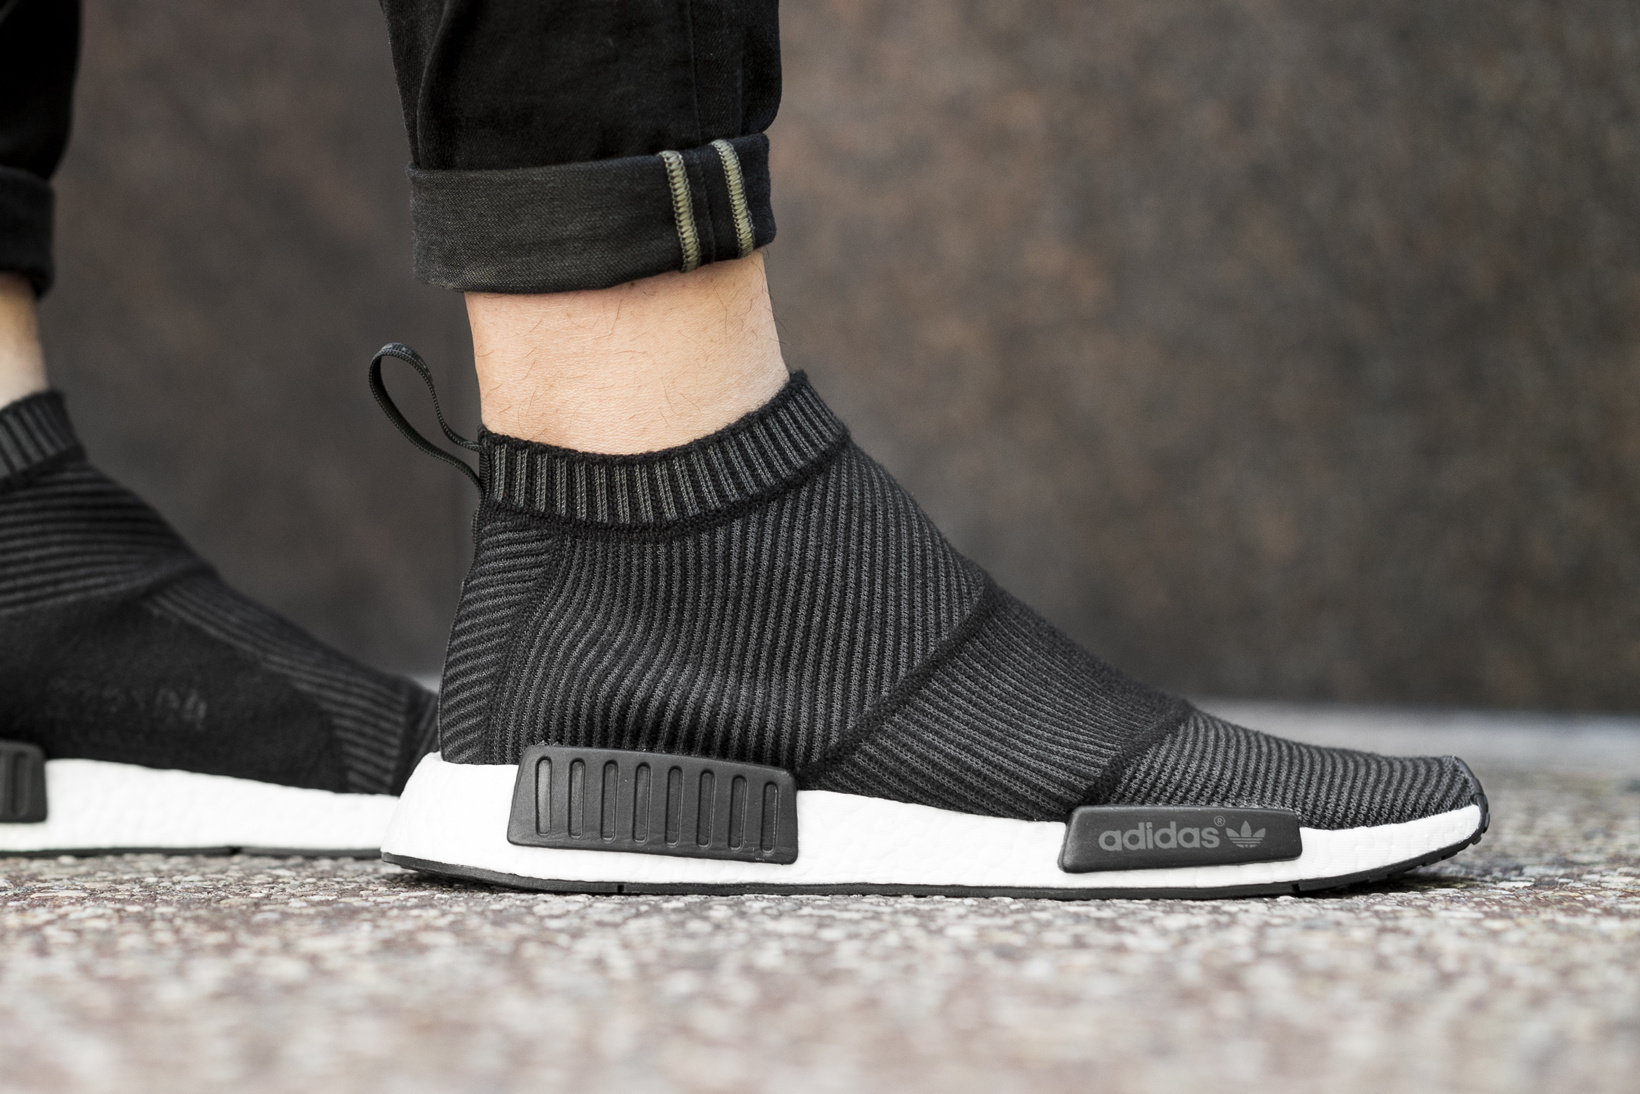 Fascinerend Idioot capaciteit Here's What's Next for Adidas NMD City Socks | Complex